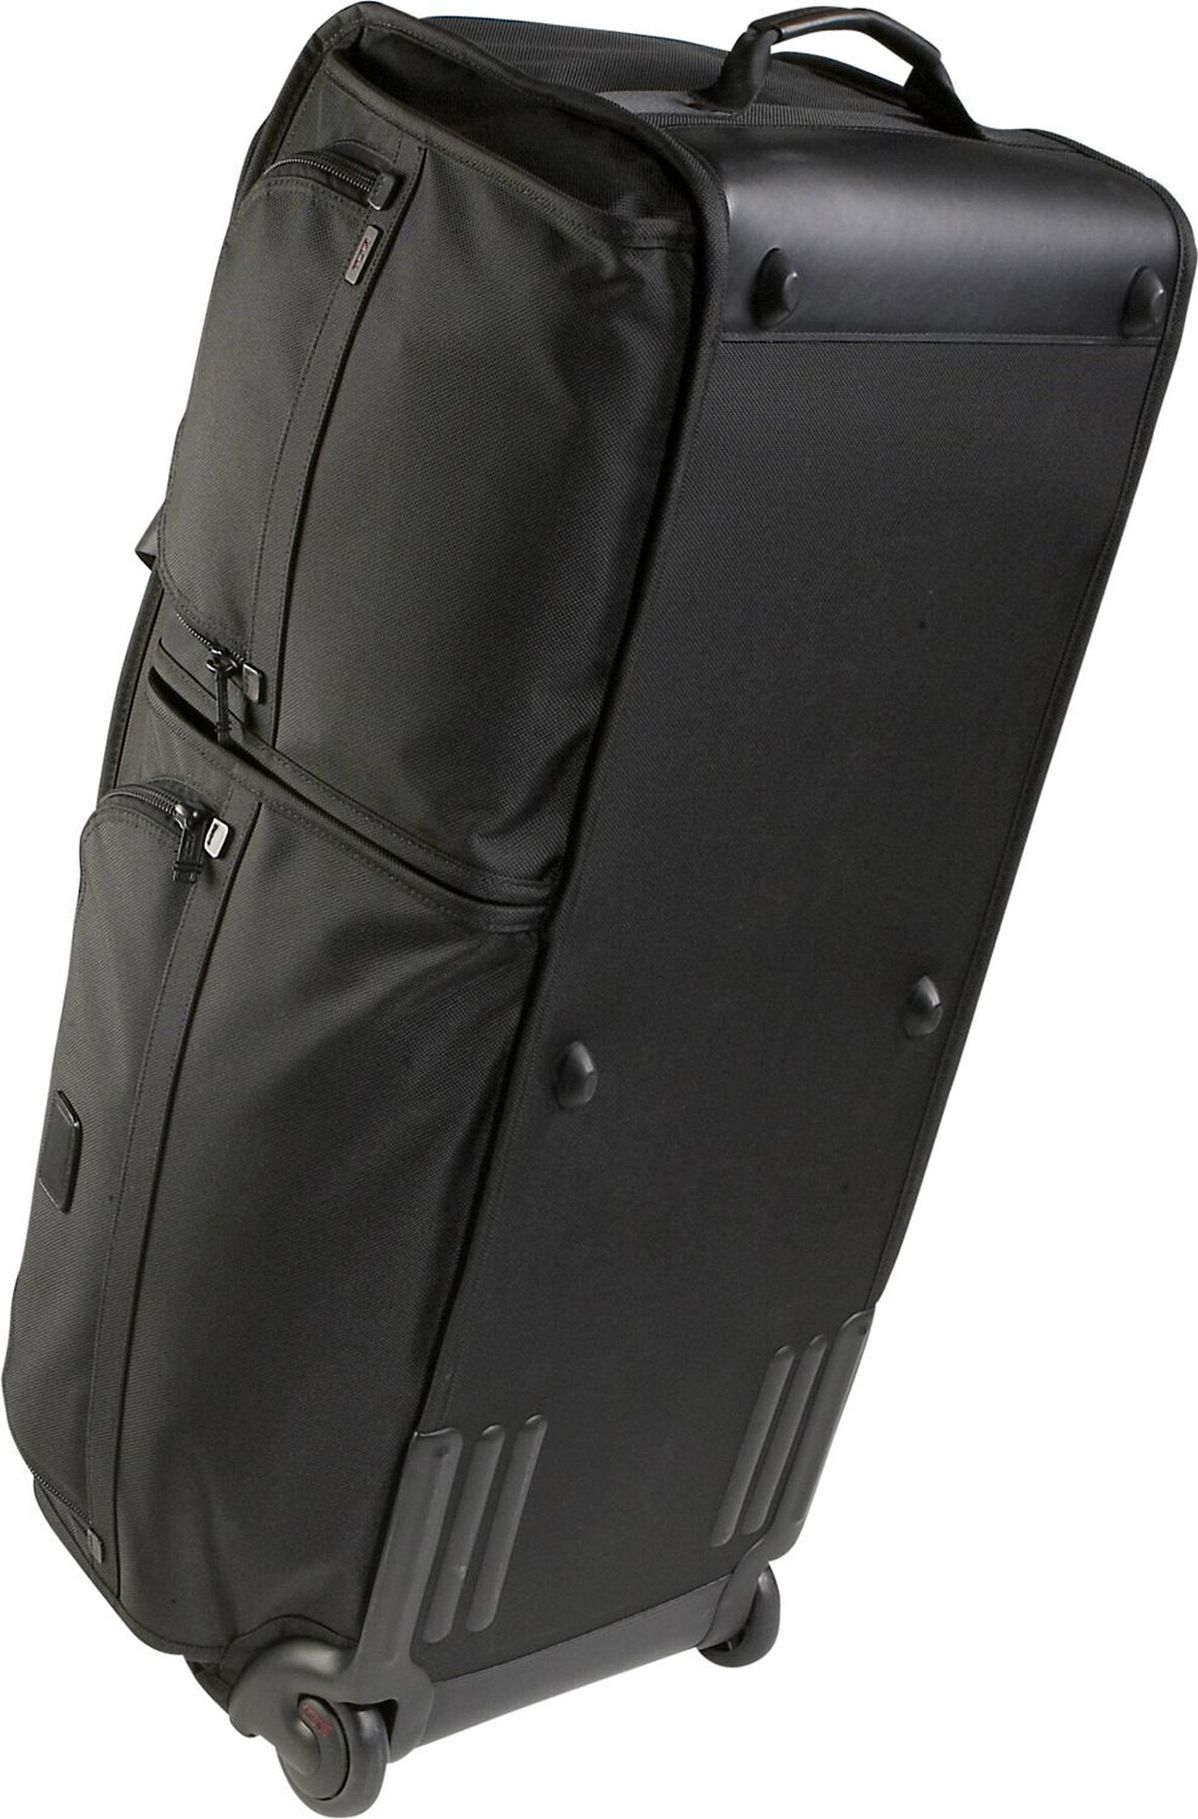 tumi travel bags with wheels